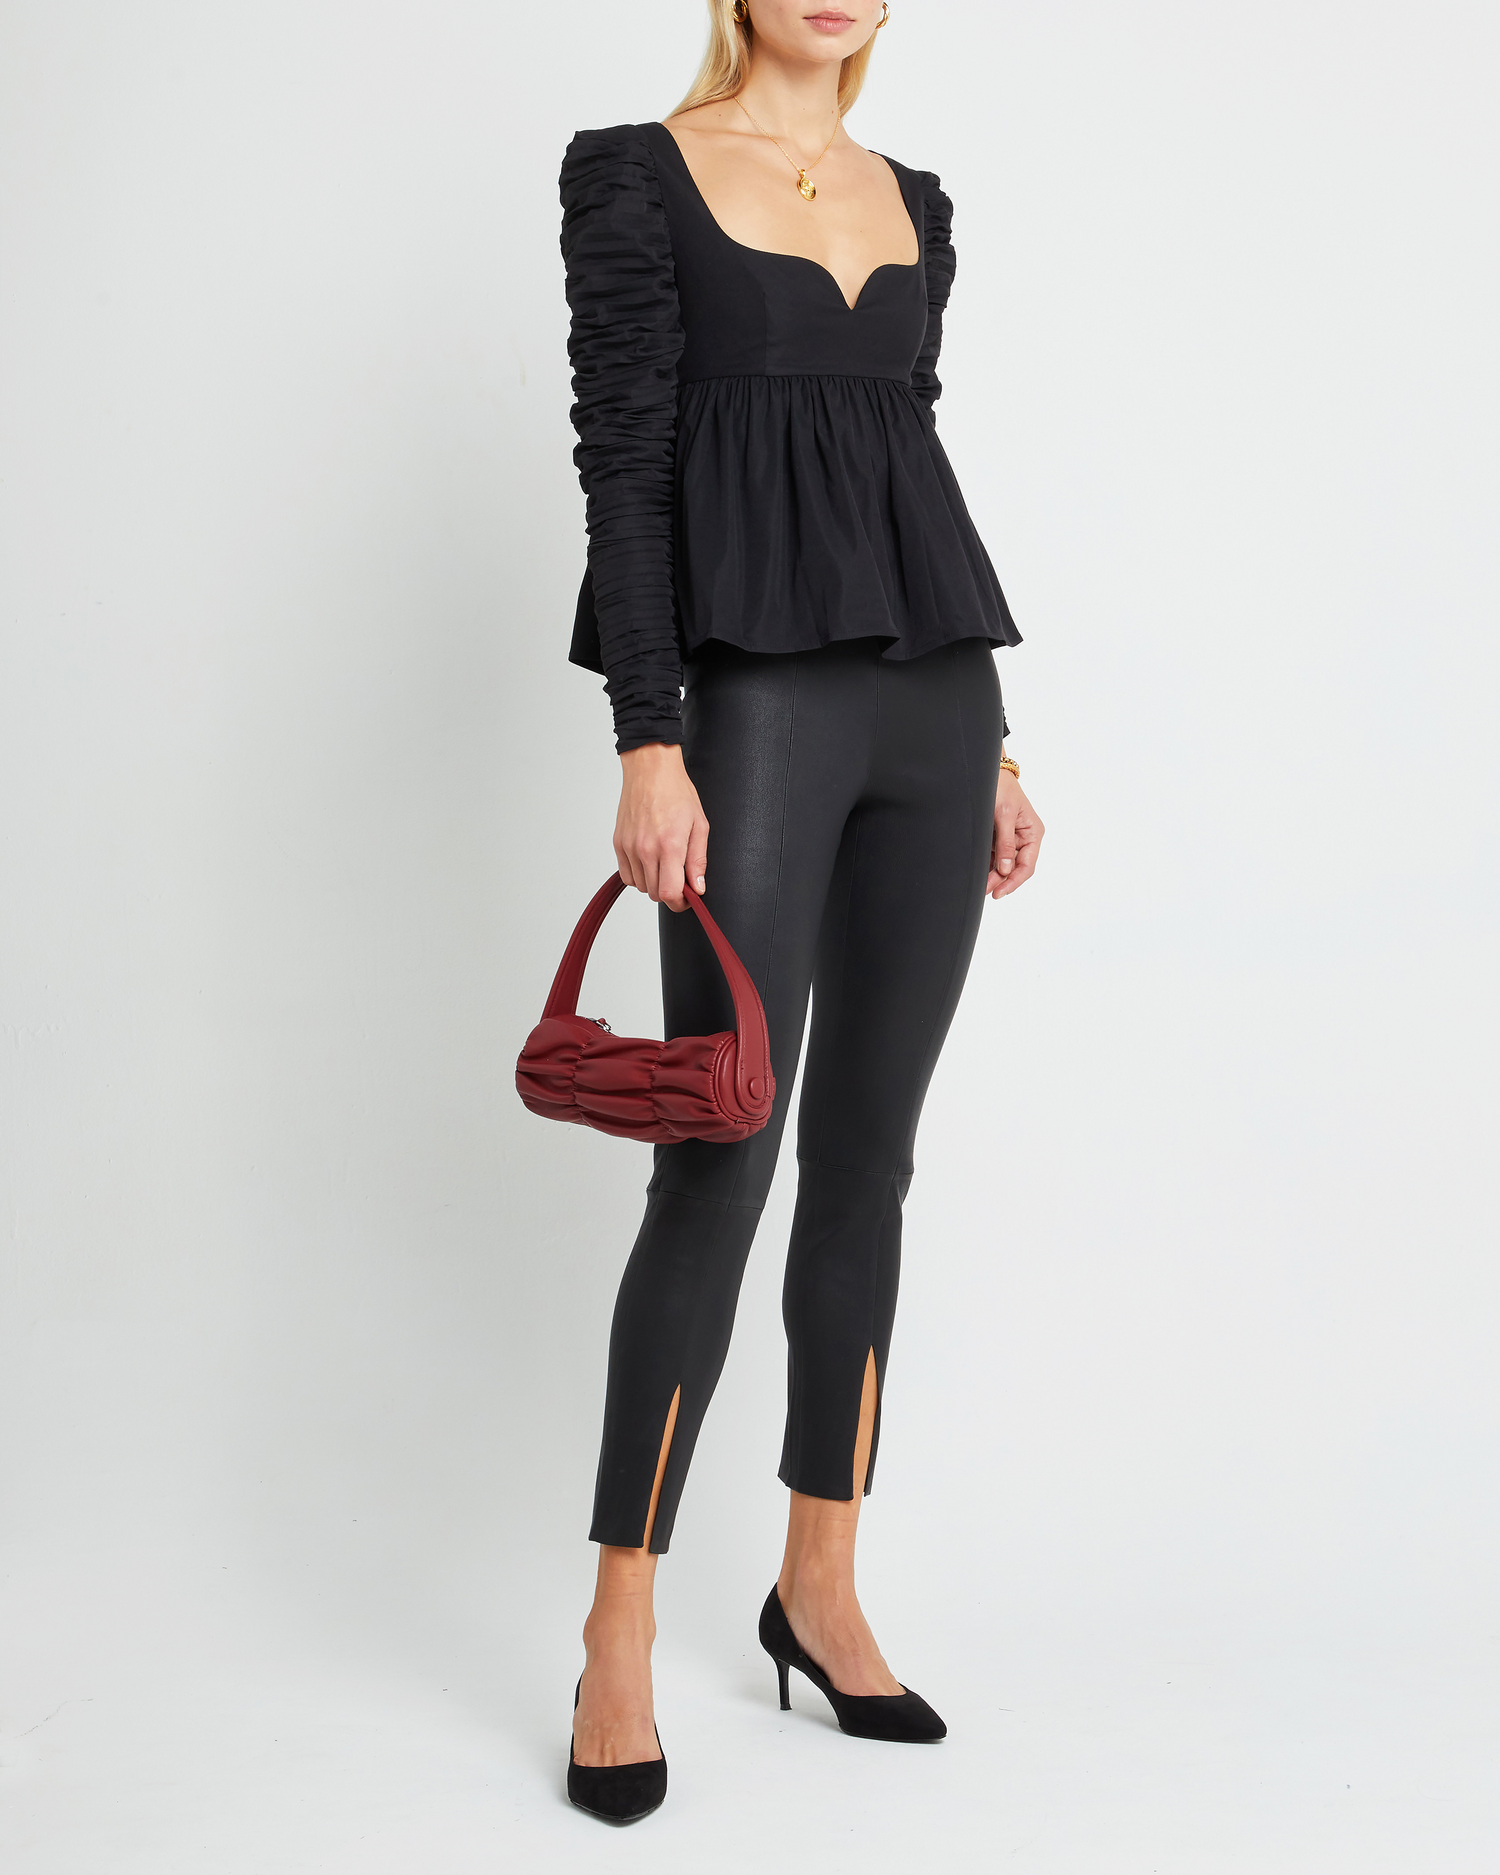 Third image of Alice Top, a black long sleeve top, ruched, long sleeve, peplum